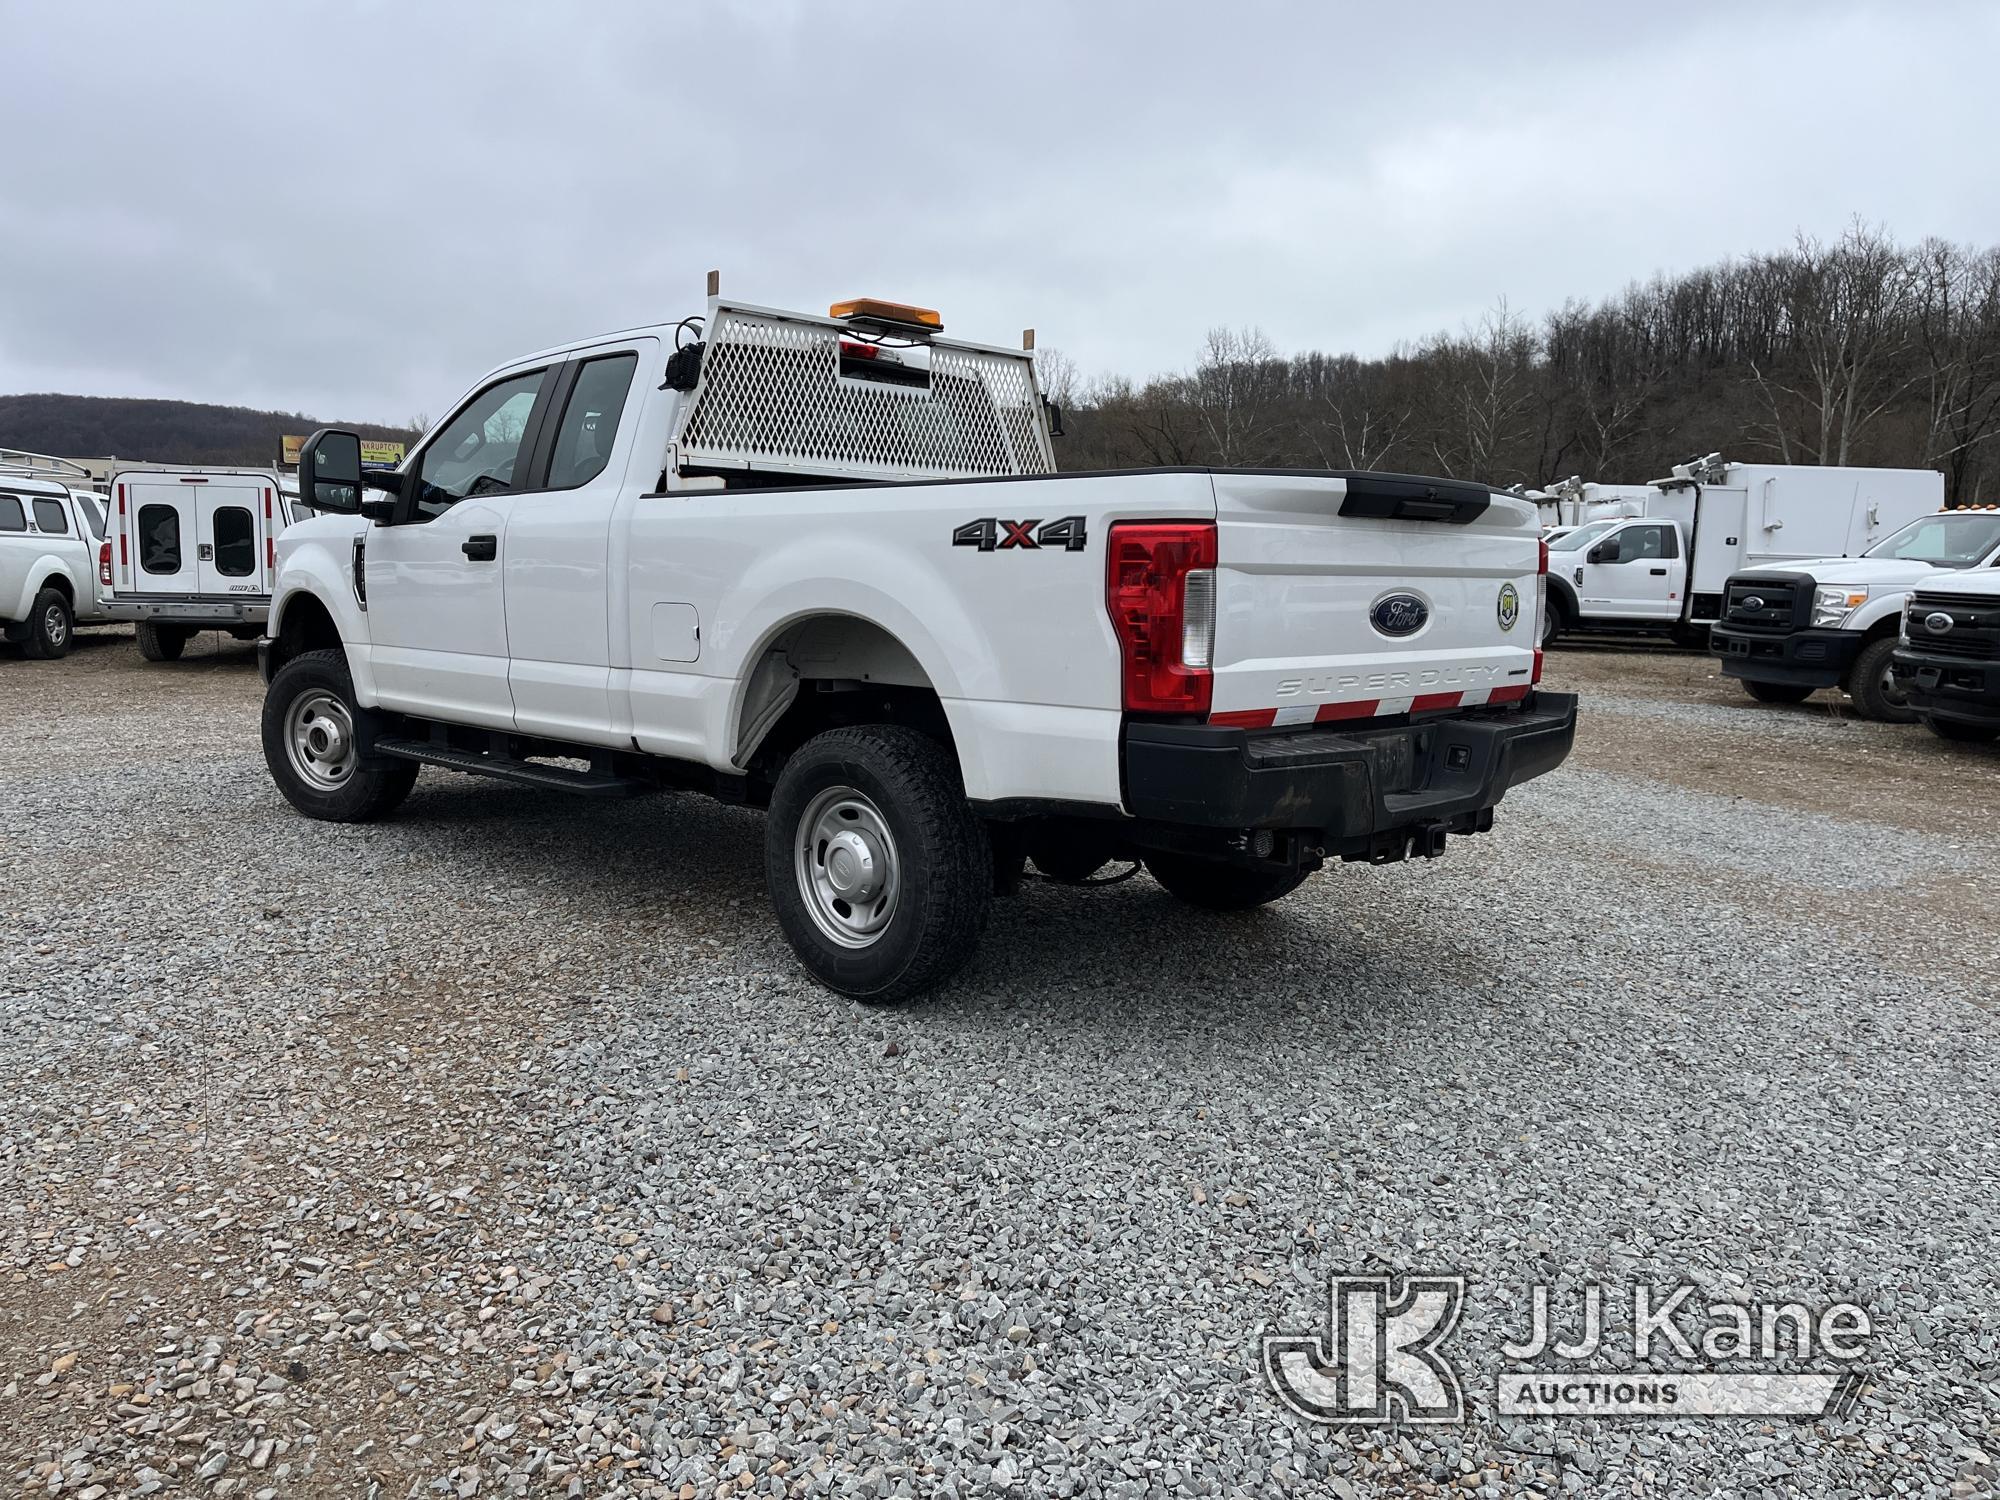 (Smock, PA) 2017 Ford F250 4x4 Extended-Cab Pickup Truck Runs & Moves, Rust & Paint Damage